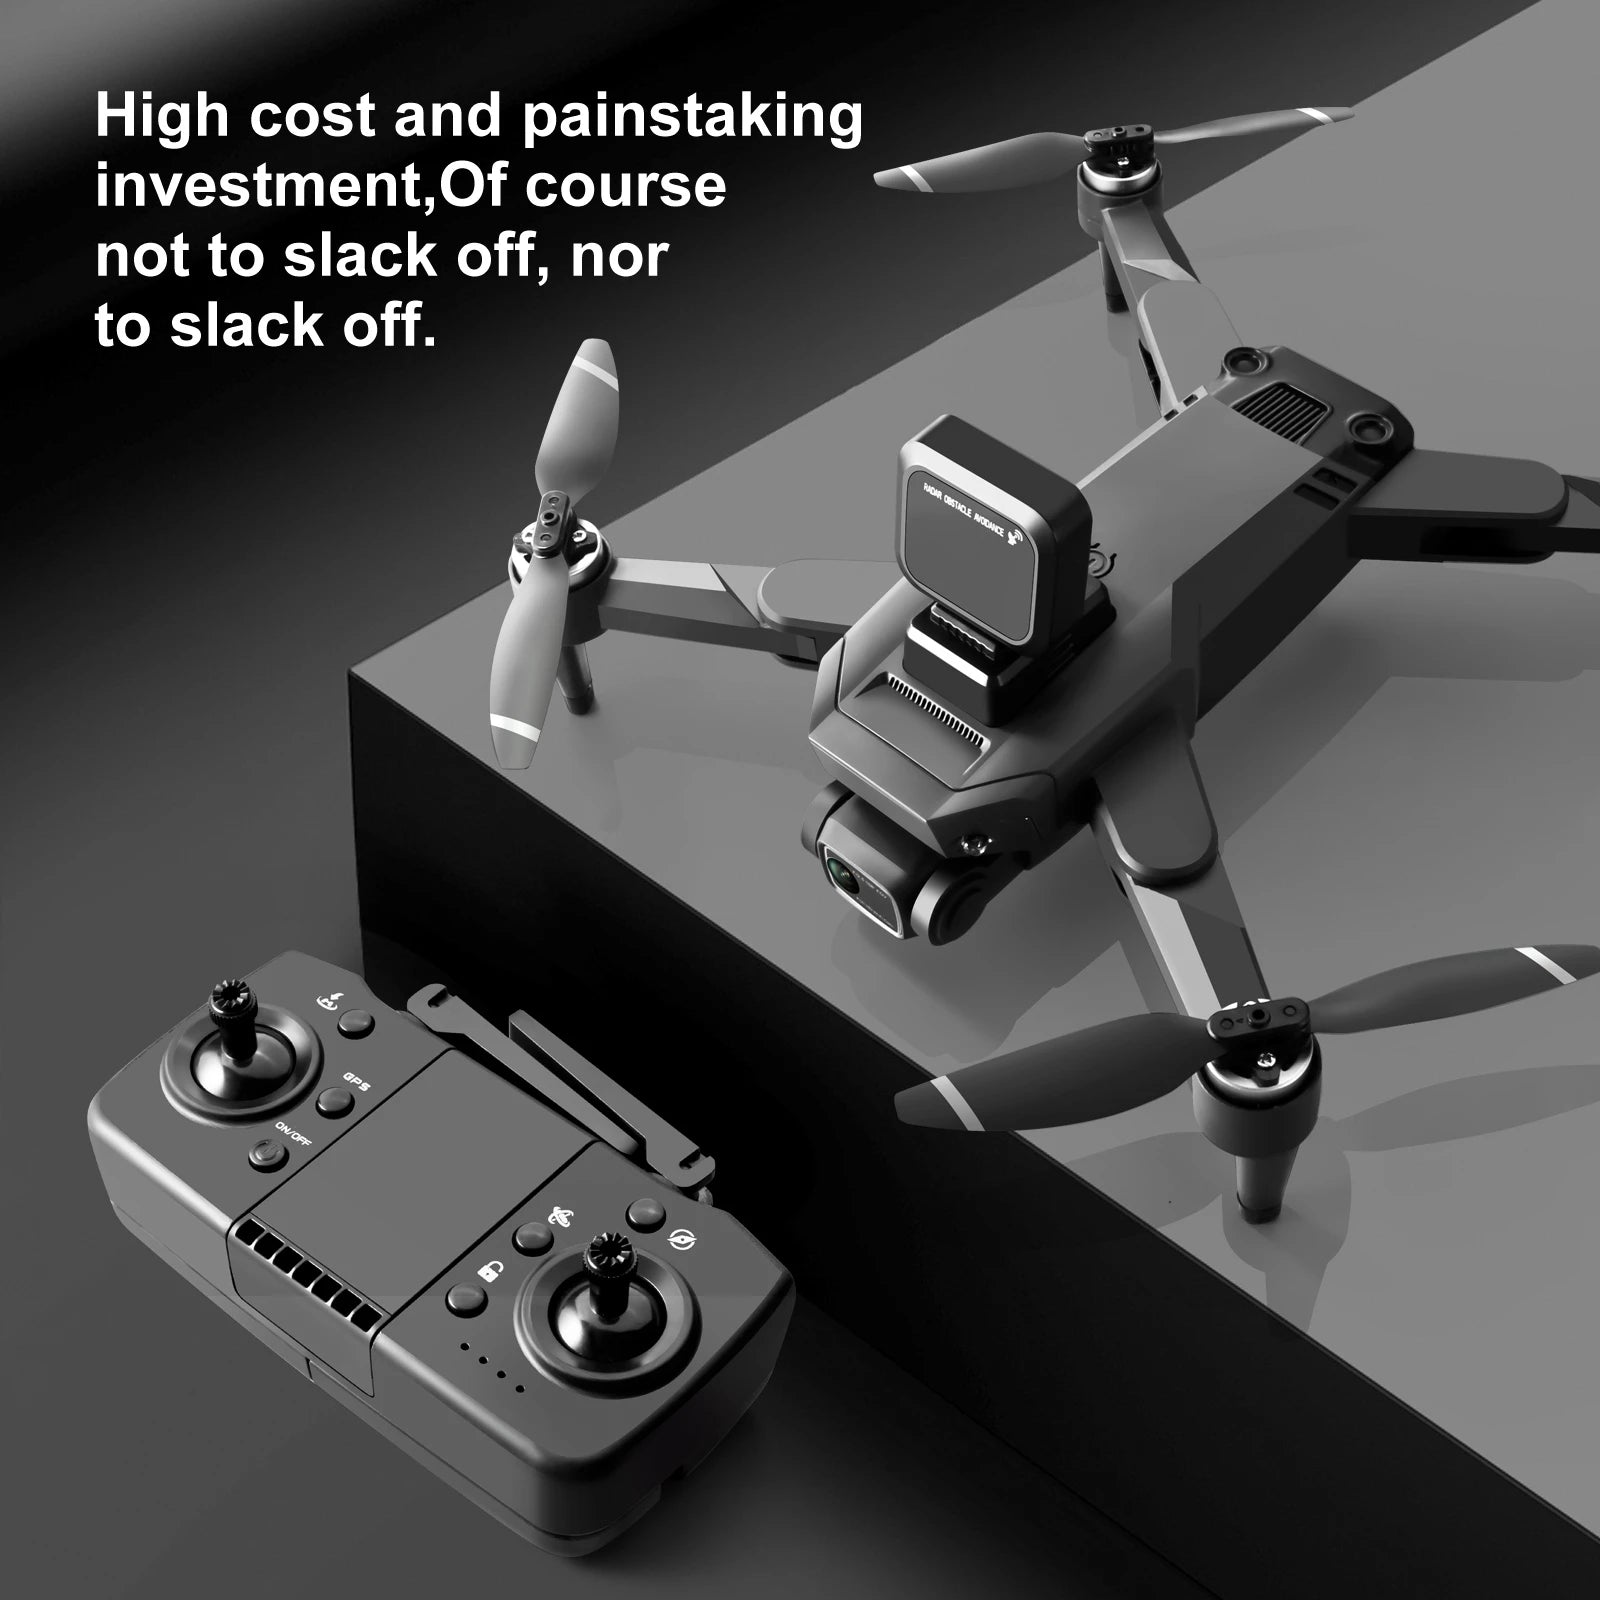 S109 GPS Drone, high cost and painstaking investment,of course not to slack off, nor